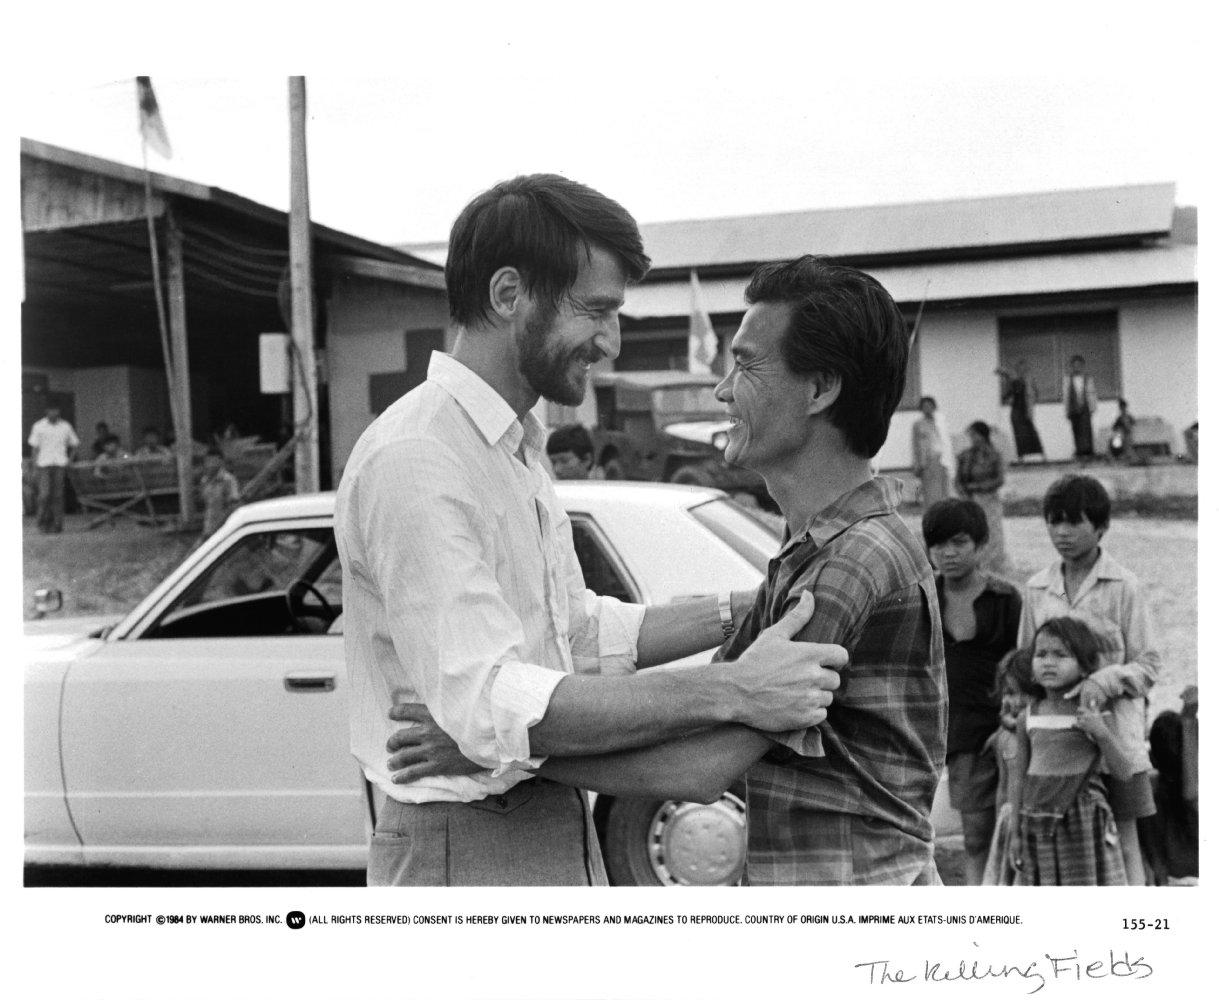 Still from Killing Fields showing actors Sam Waterston and Haing Ngor